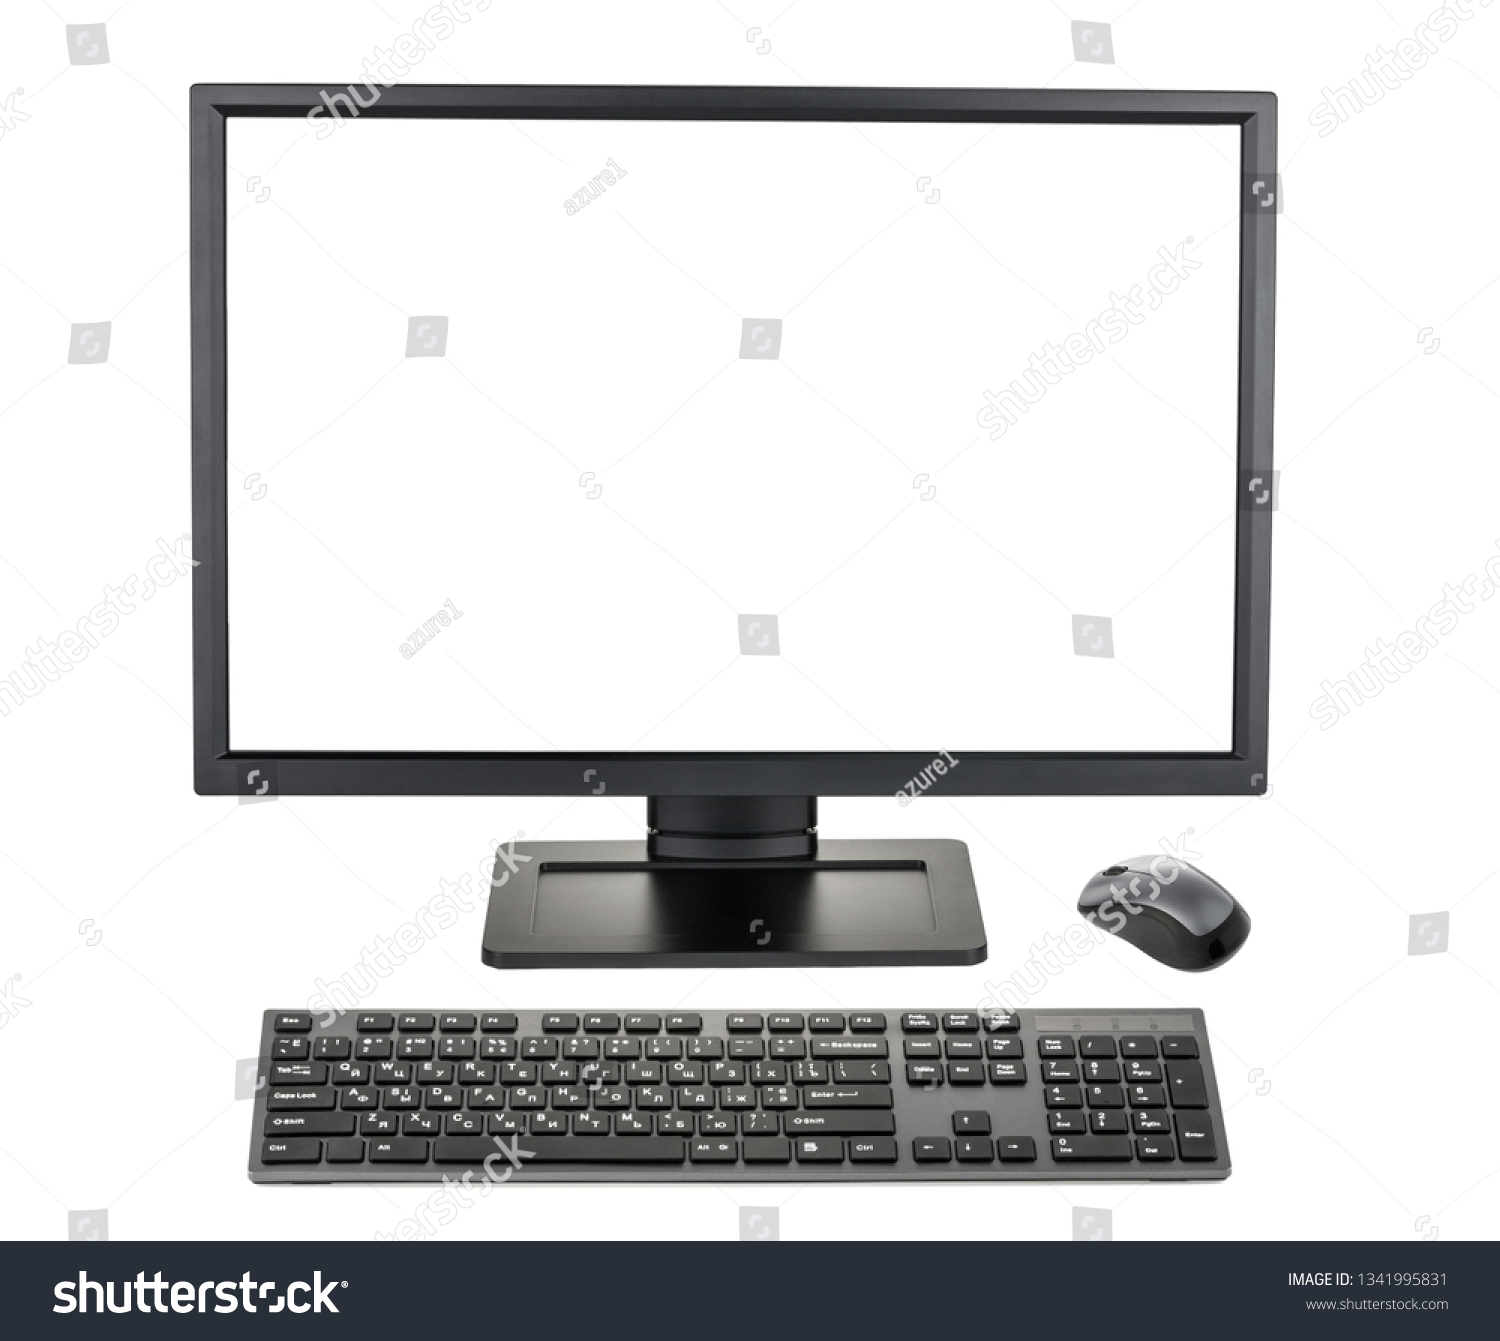 Desktop PC. Desktop computer isolated without shadow #1341995831